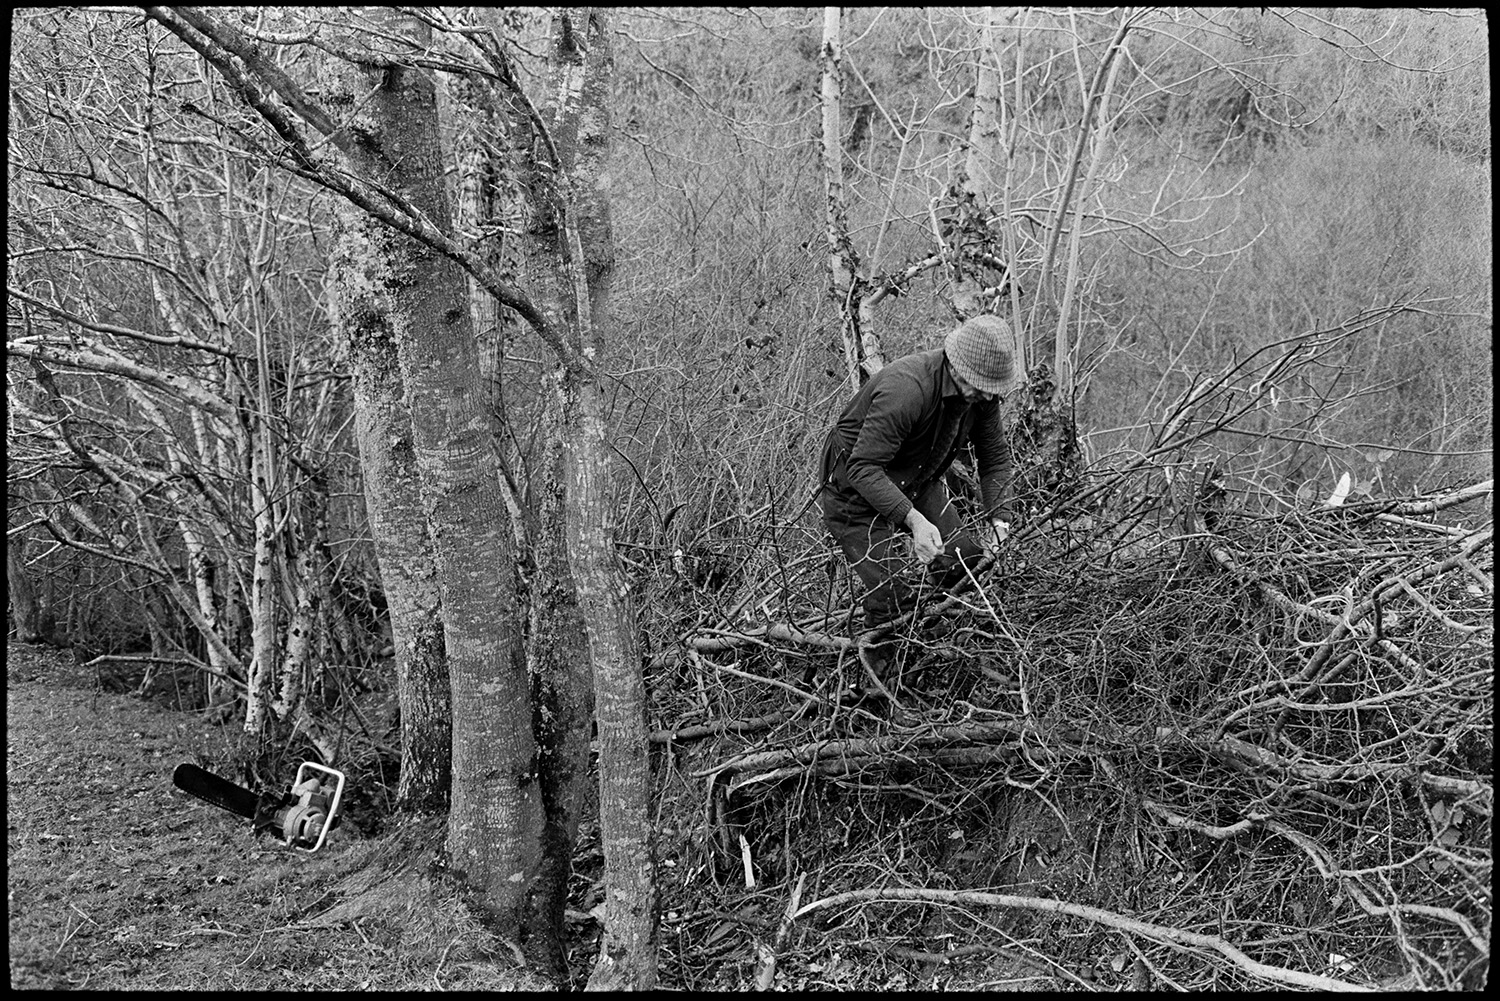 Man laying hedge.
[Gerald Harris laying a hedge at Millhams, Dolton. A chainsaw lies on the ground behind him and woodland is visible in the background.]